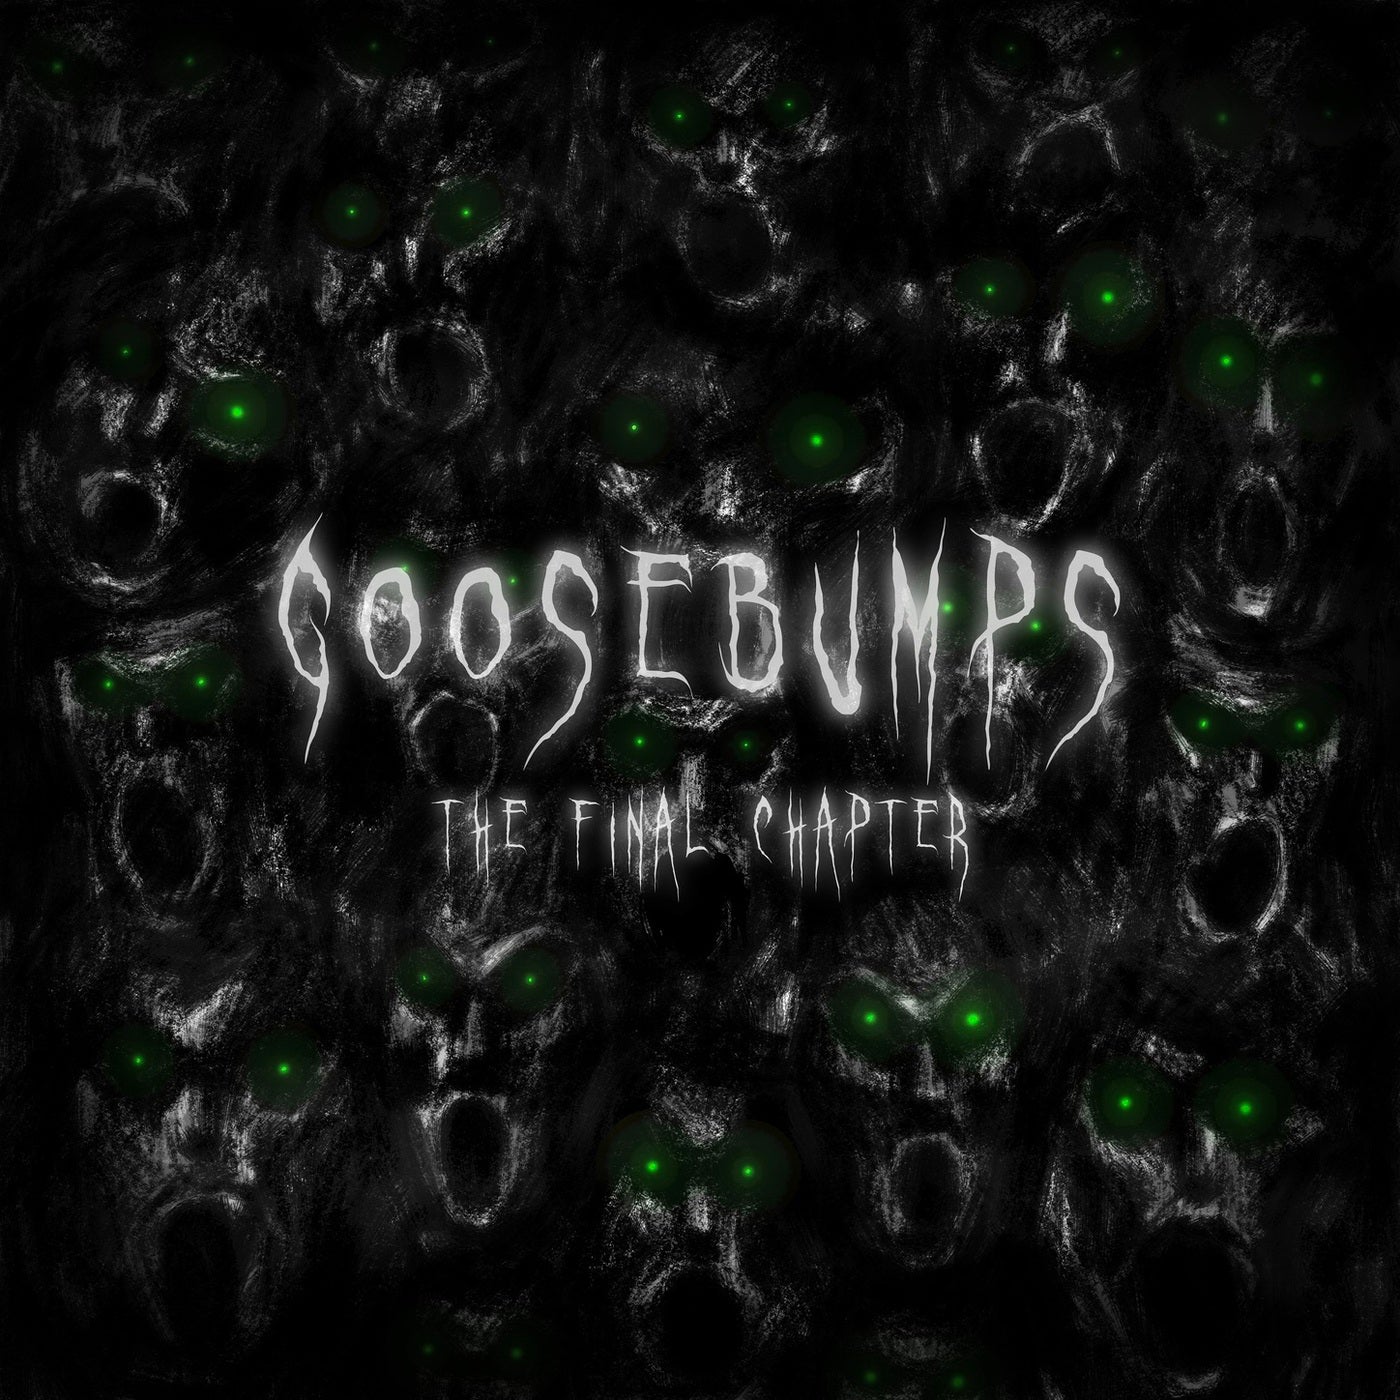 Goosebumps 3 - The Final Chapter